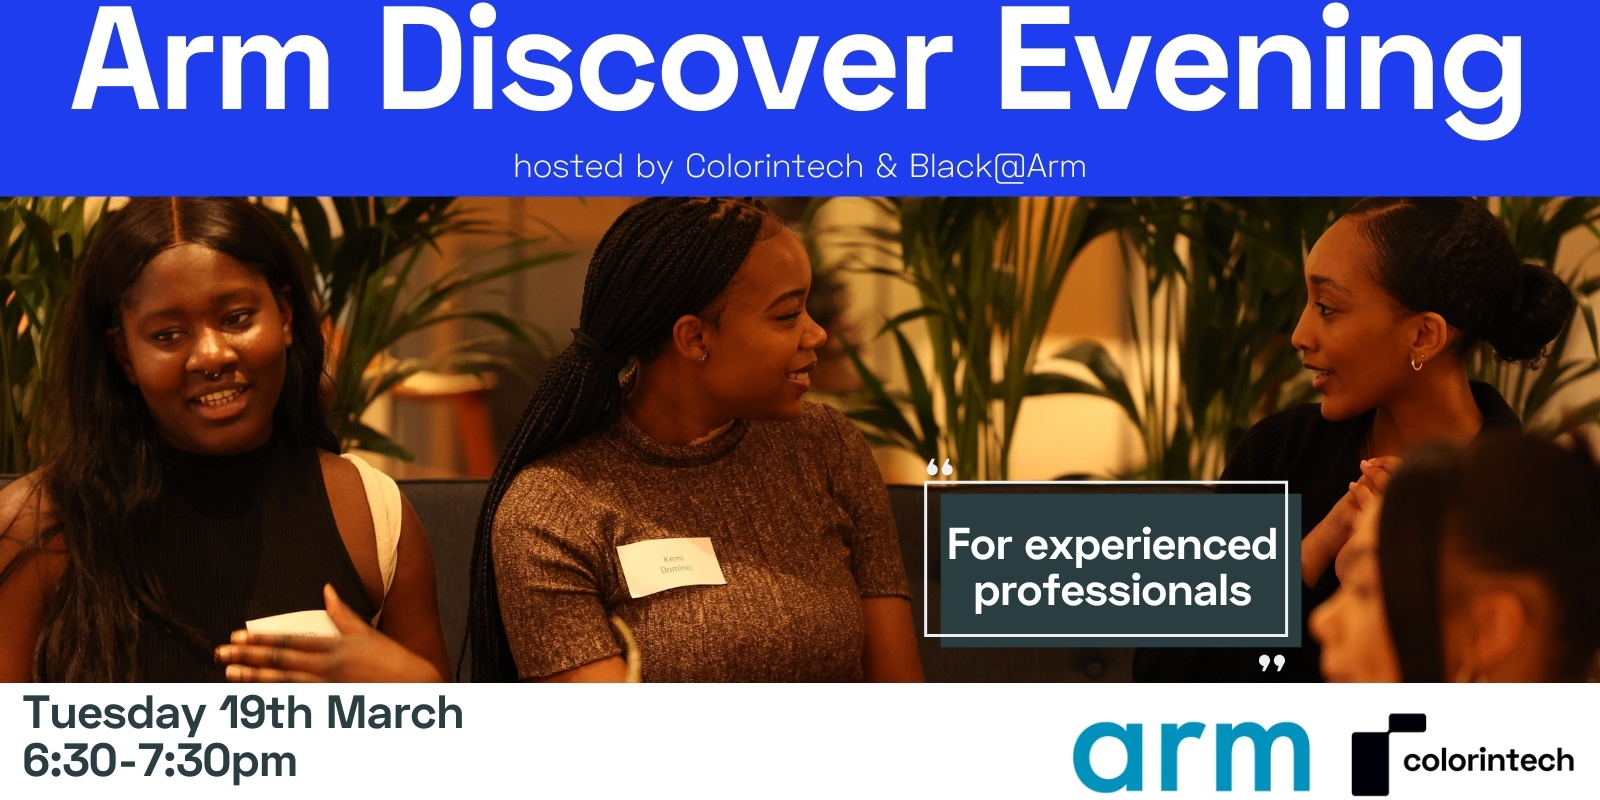 Banner image for Arm Discover Evening hosted by Colorintech & Black@Arm